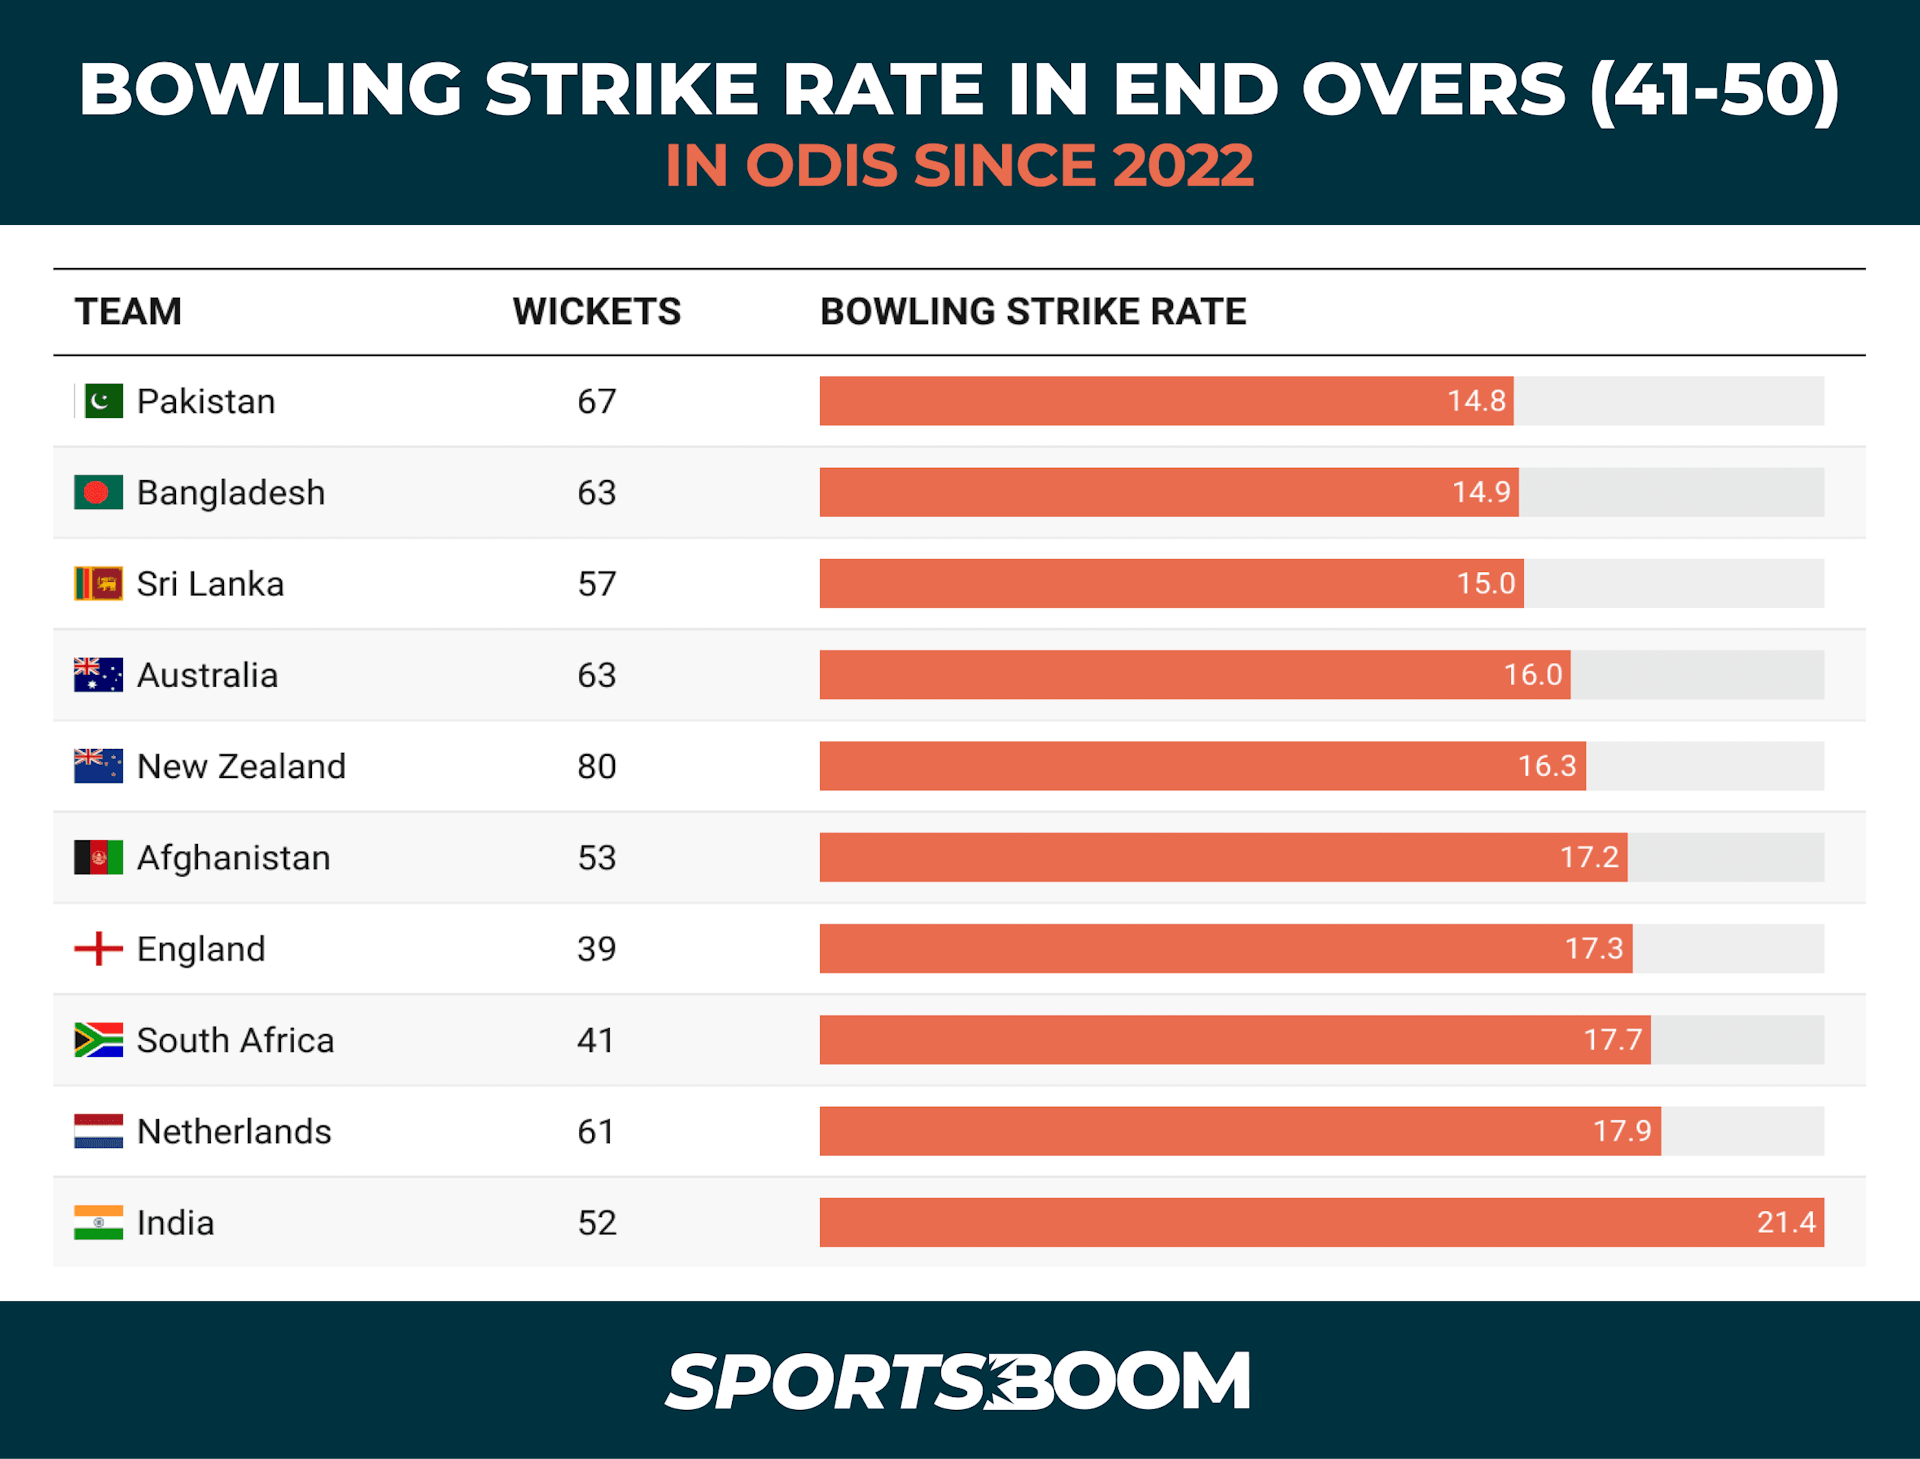 BOWLING STRIKE RATE IN END OVERS (41-50) IN ODIS SINCE 2022.png